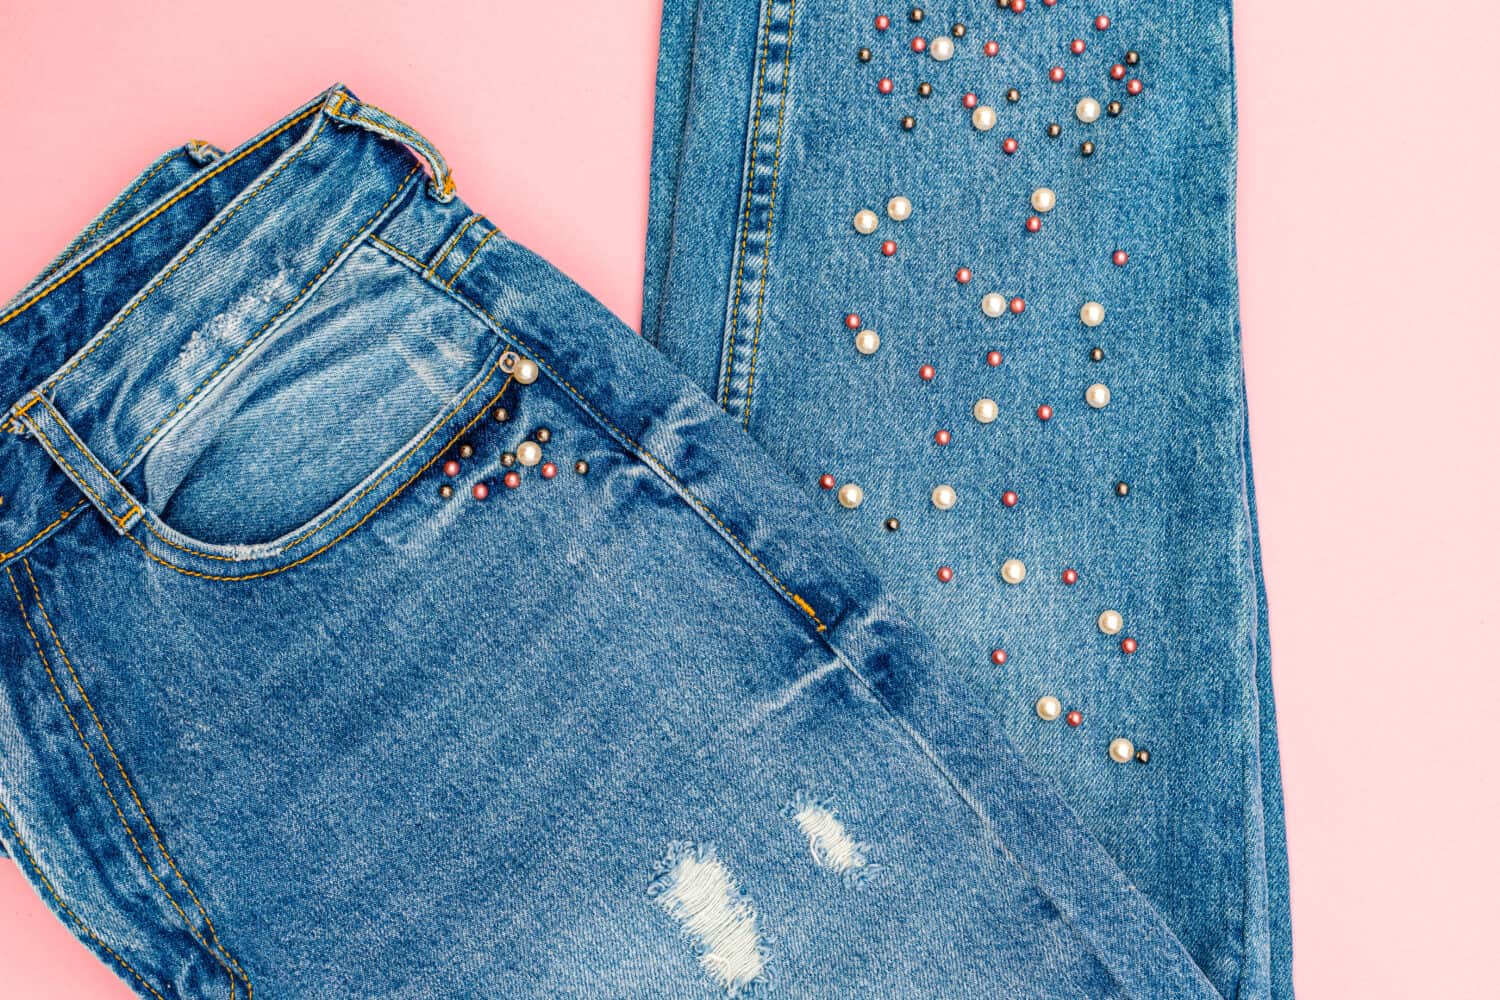 Denim jeans pants with beads on pink surface. Ripped Destroyed Torn Blue denim cloth background.